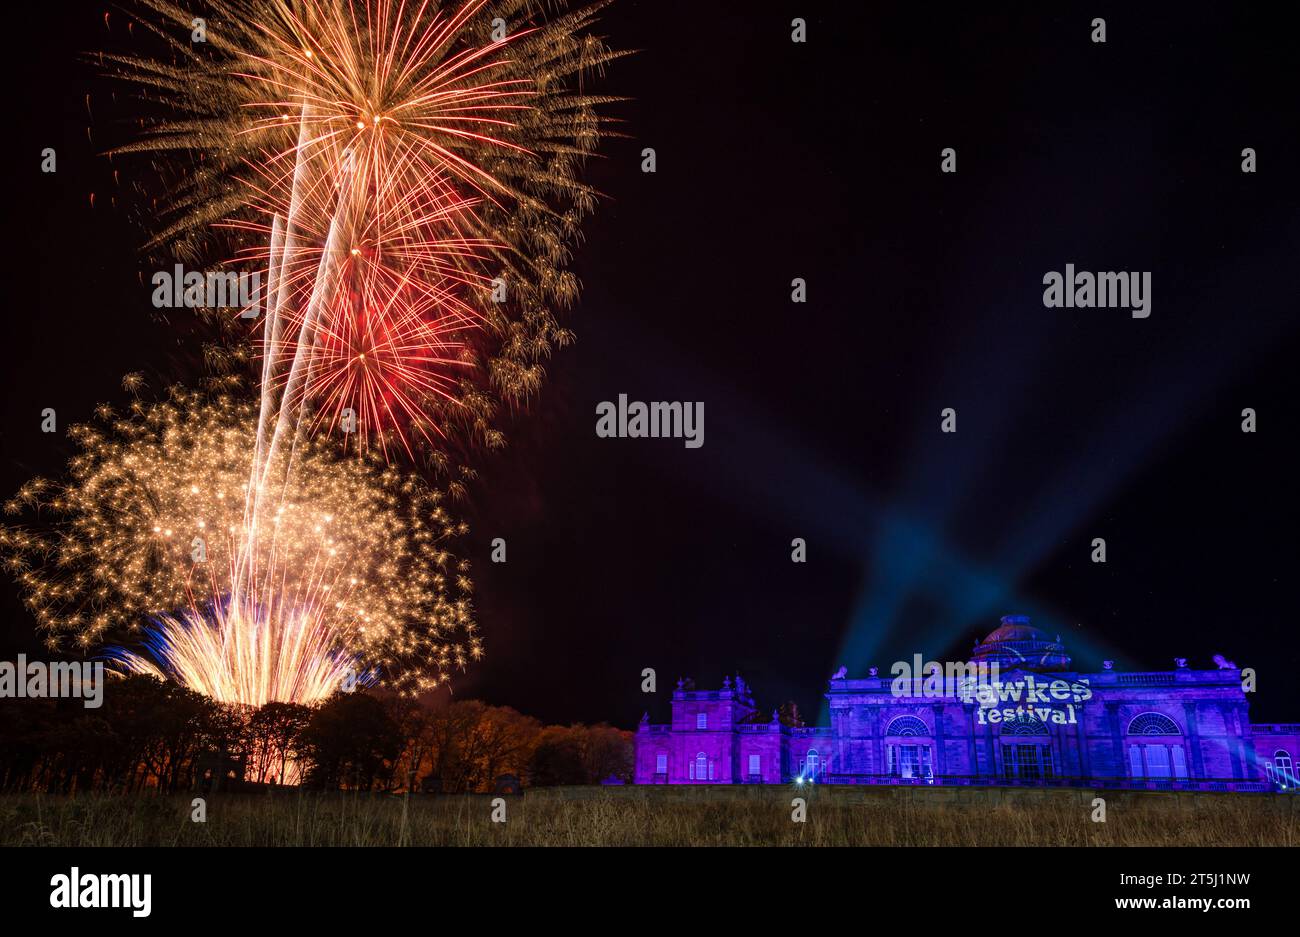 Gosford House, East Lothian, Scotland, UK, 5th November 2023. Fawkes Festival: the fireworks event takes place in the Gosford Estate to celebrate Guy Fawkes night. A large scale fireworks display bursts in the nght sky by the stately country mansion. Credit: Sally Anderson/Alamy Live News Stock Photo